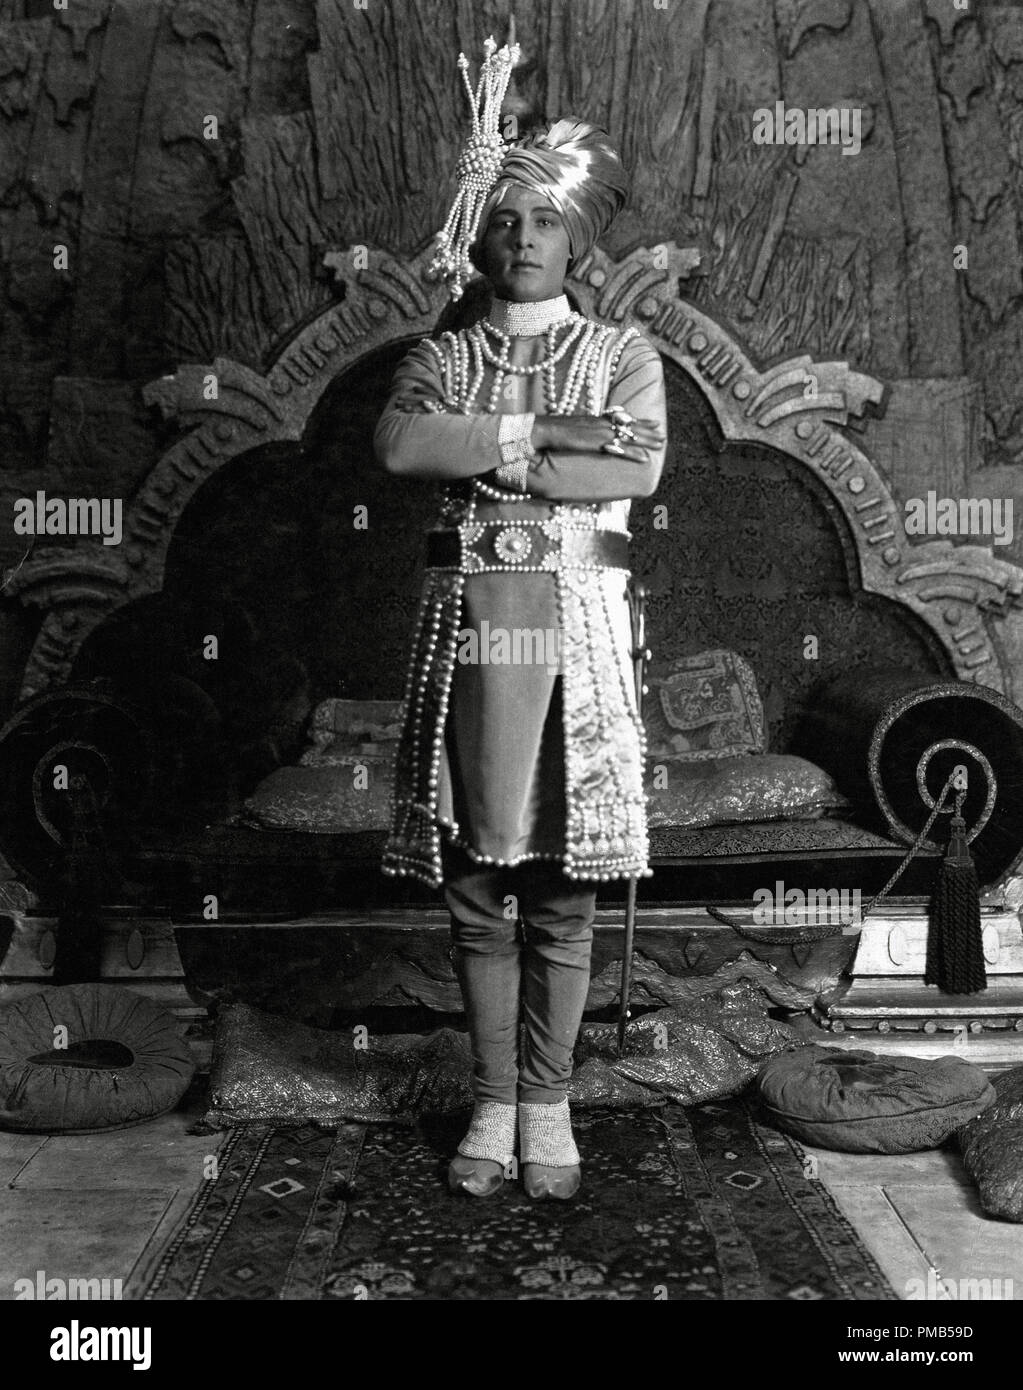 Rudolph Valentino, 'The Young Rajah' 1922 Paramount    File Reference # 33536 443THA Stock Photo